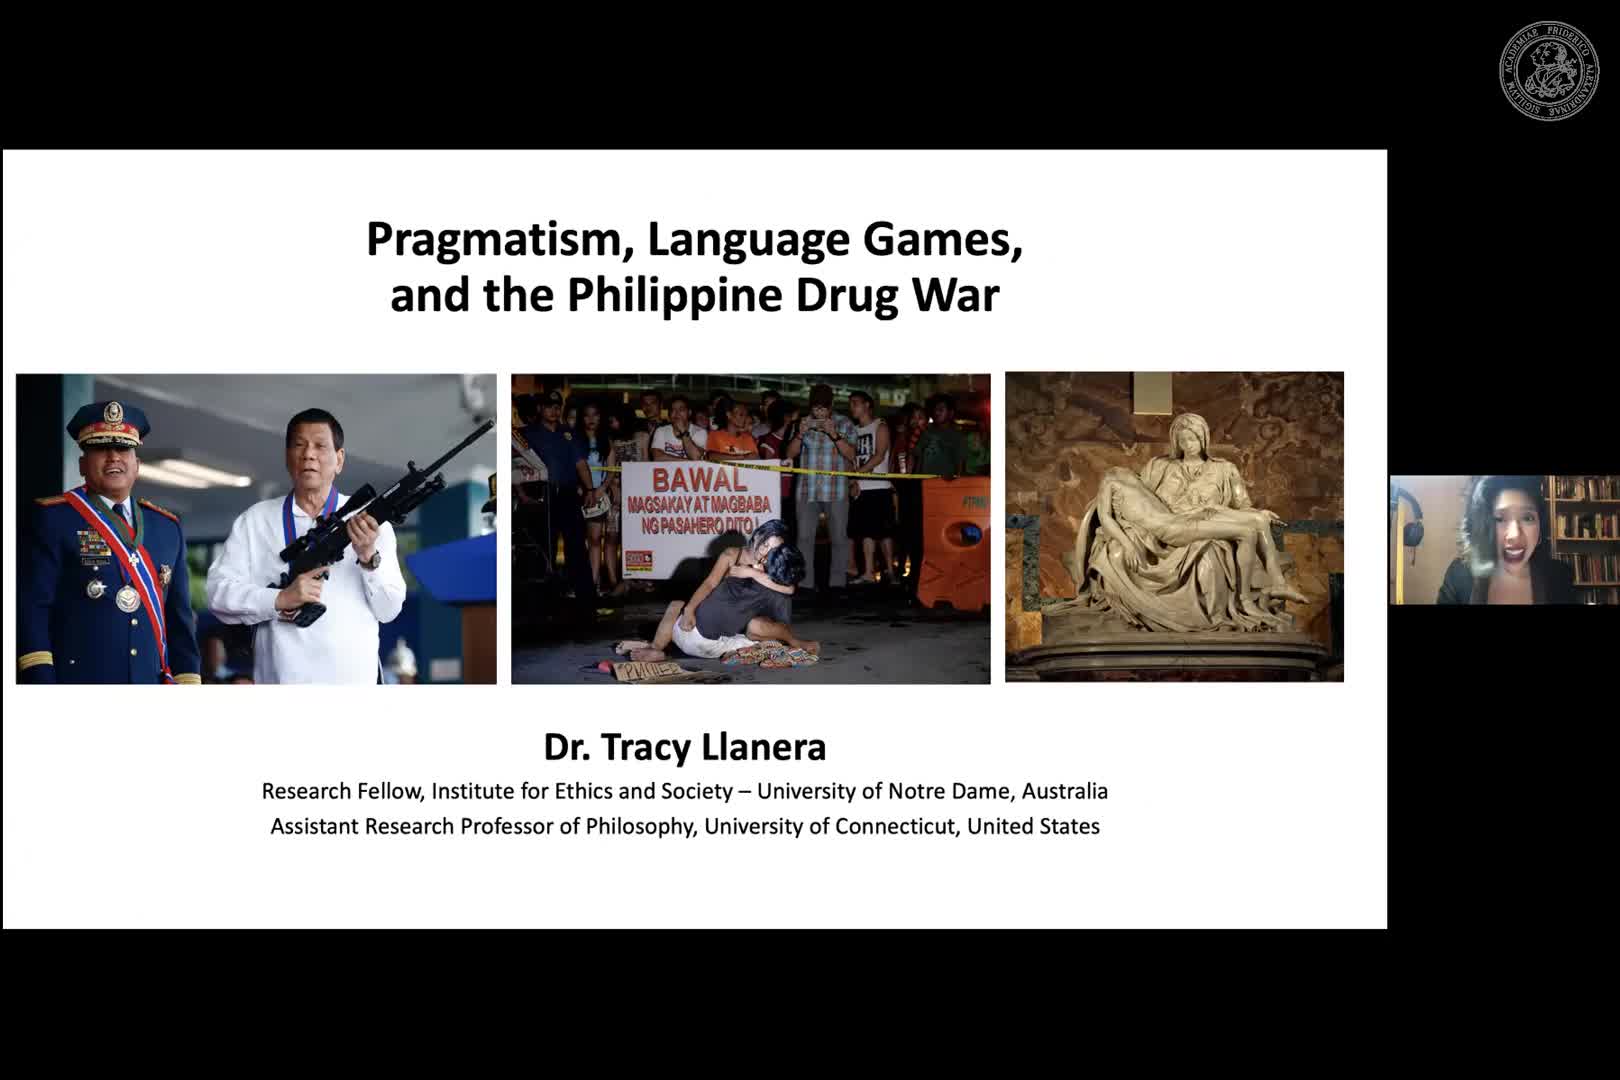 Tracy Llanera (University of Connecticut): "Pragmatism, Language Games, and the Philippine Drug War" preview image